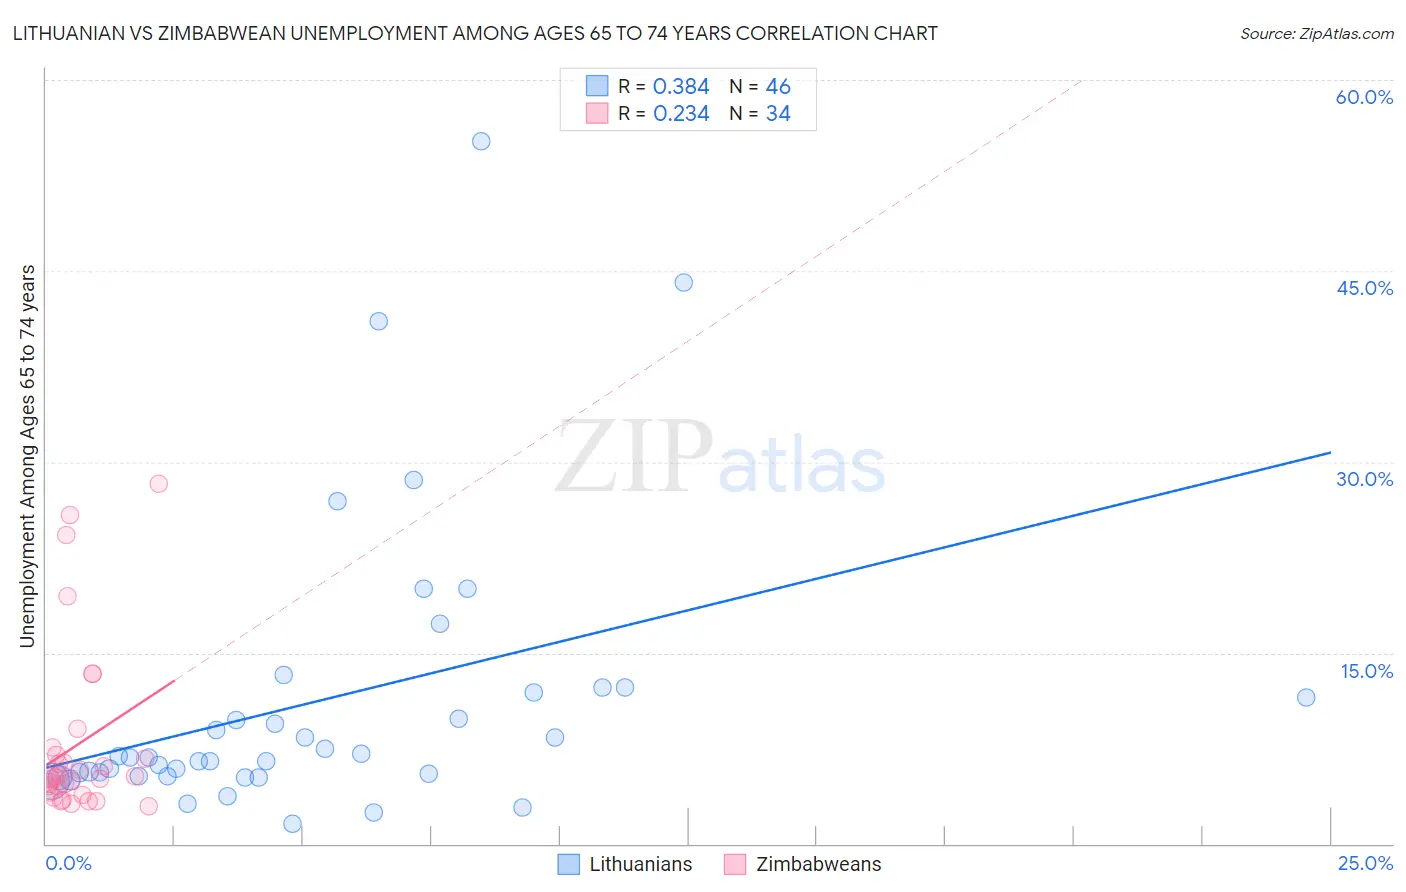 Lithuanian vs Zimbabwean Unemployment Among Ages 65 to 74 years